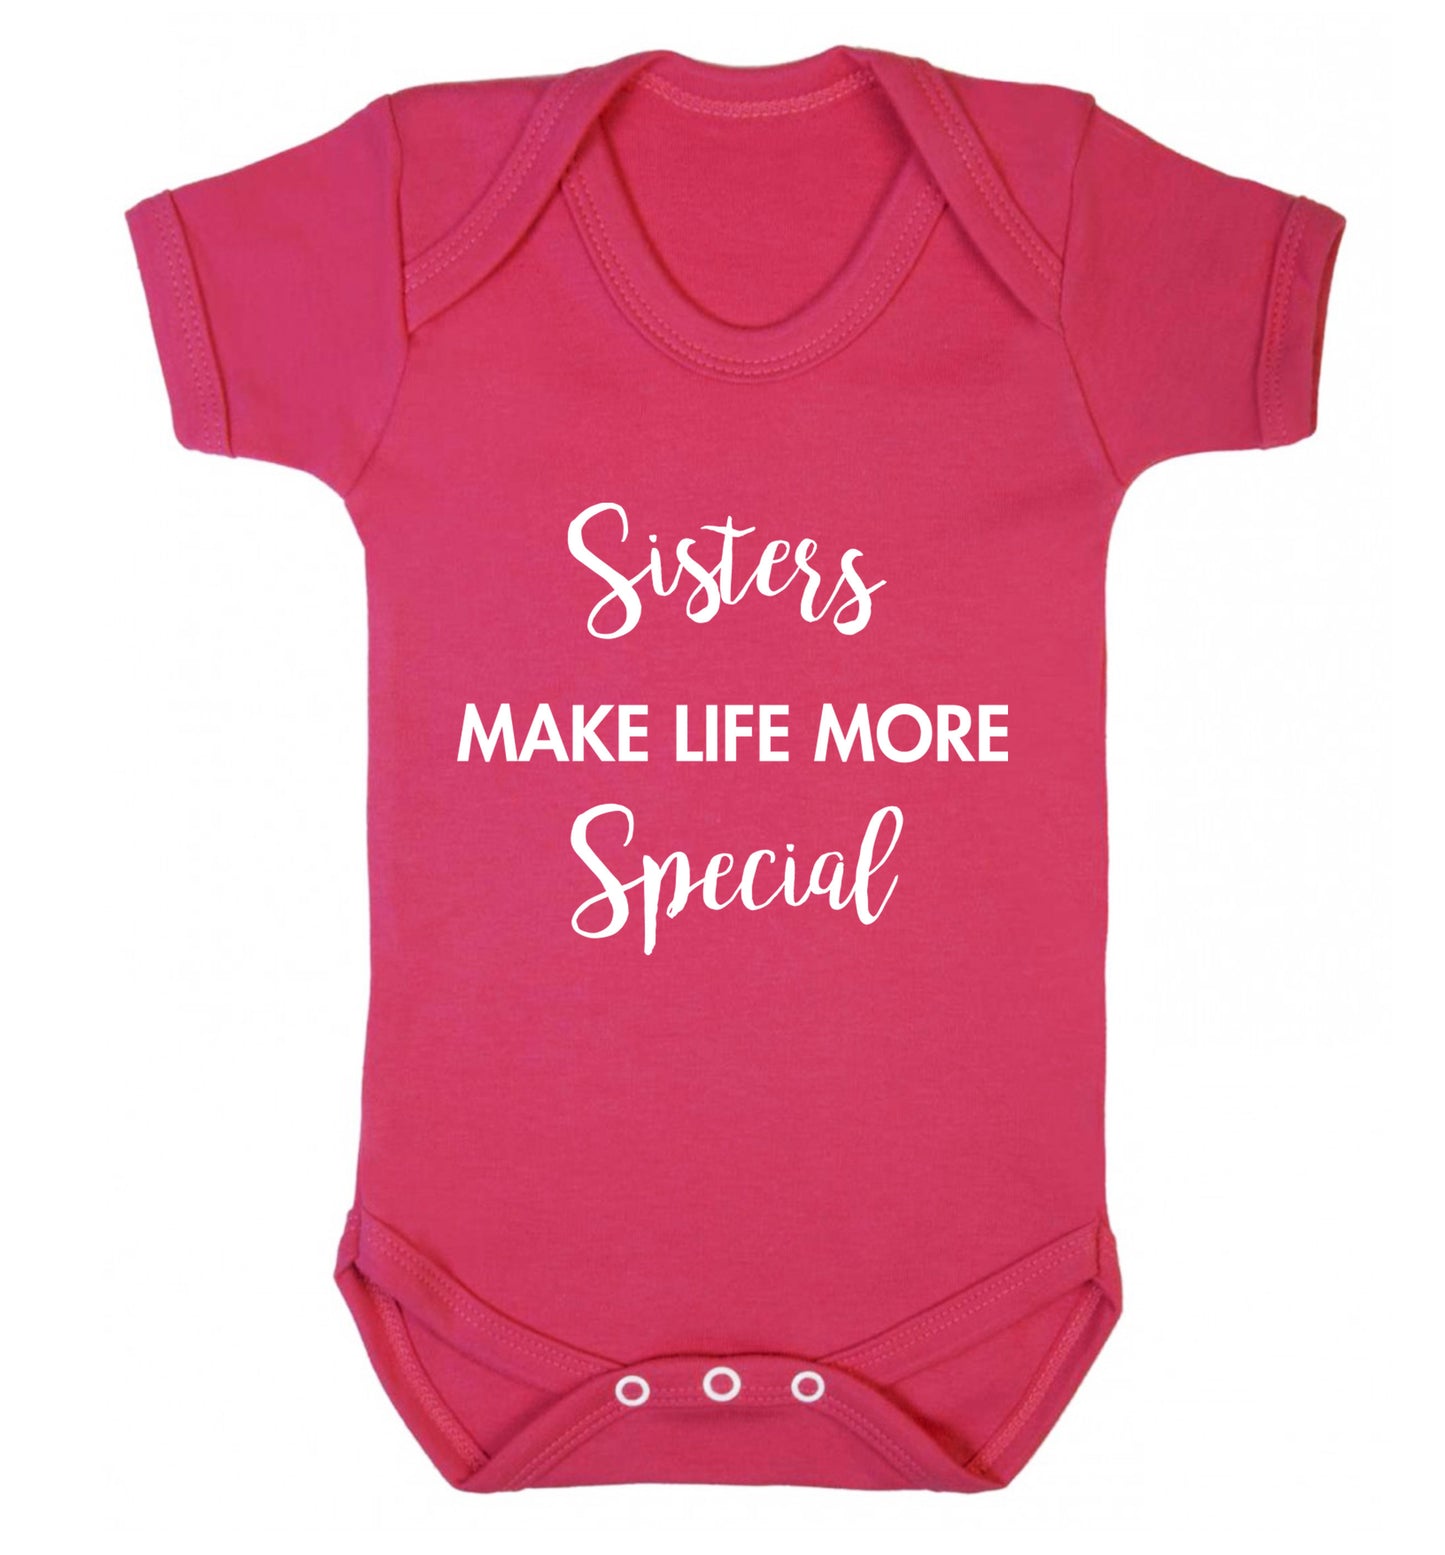 Sisters make life more special Baby Vest dark pink 18-24 months